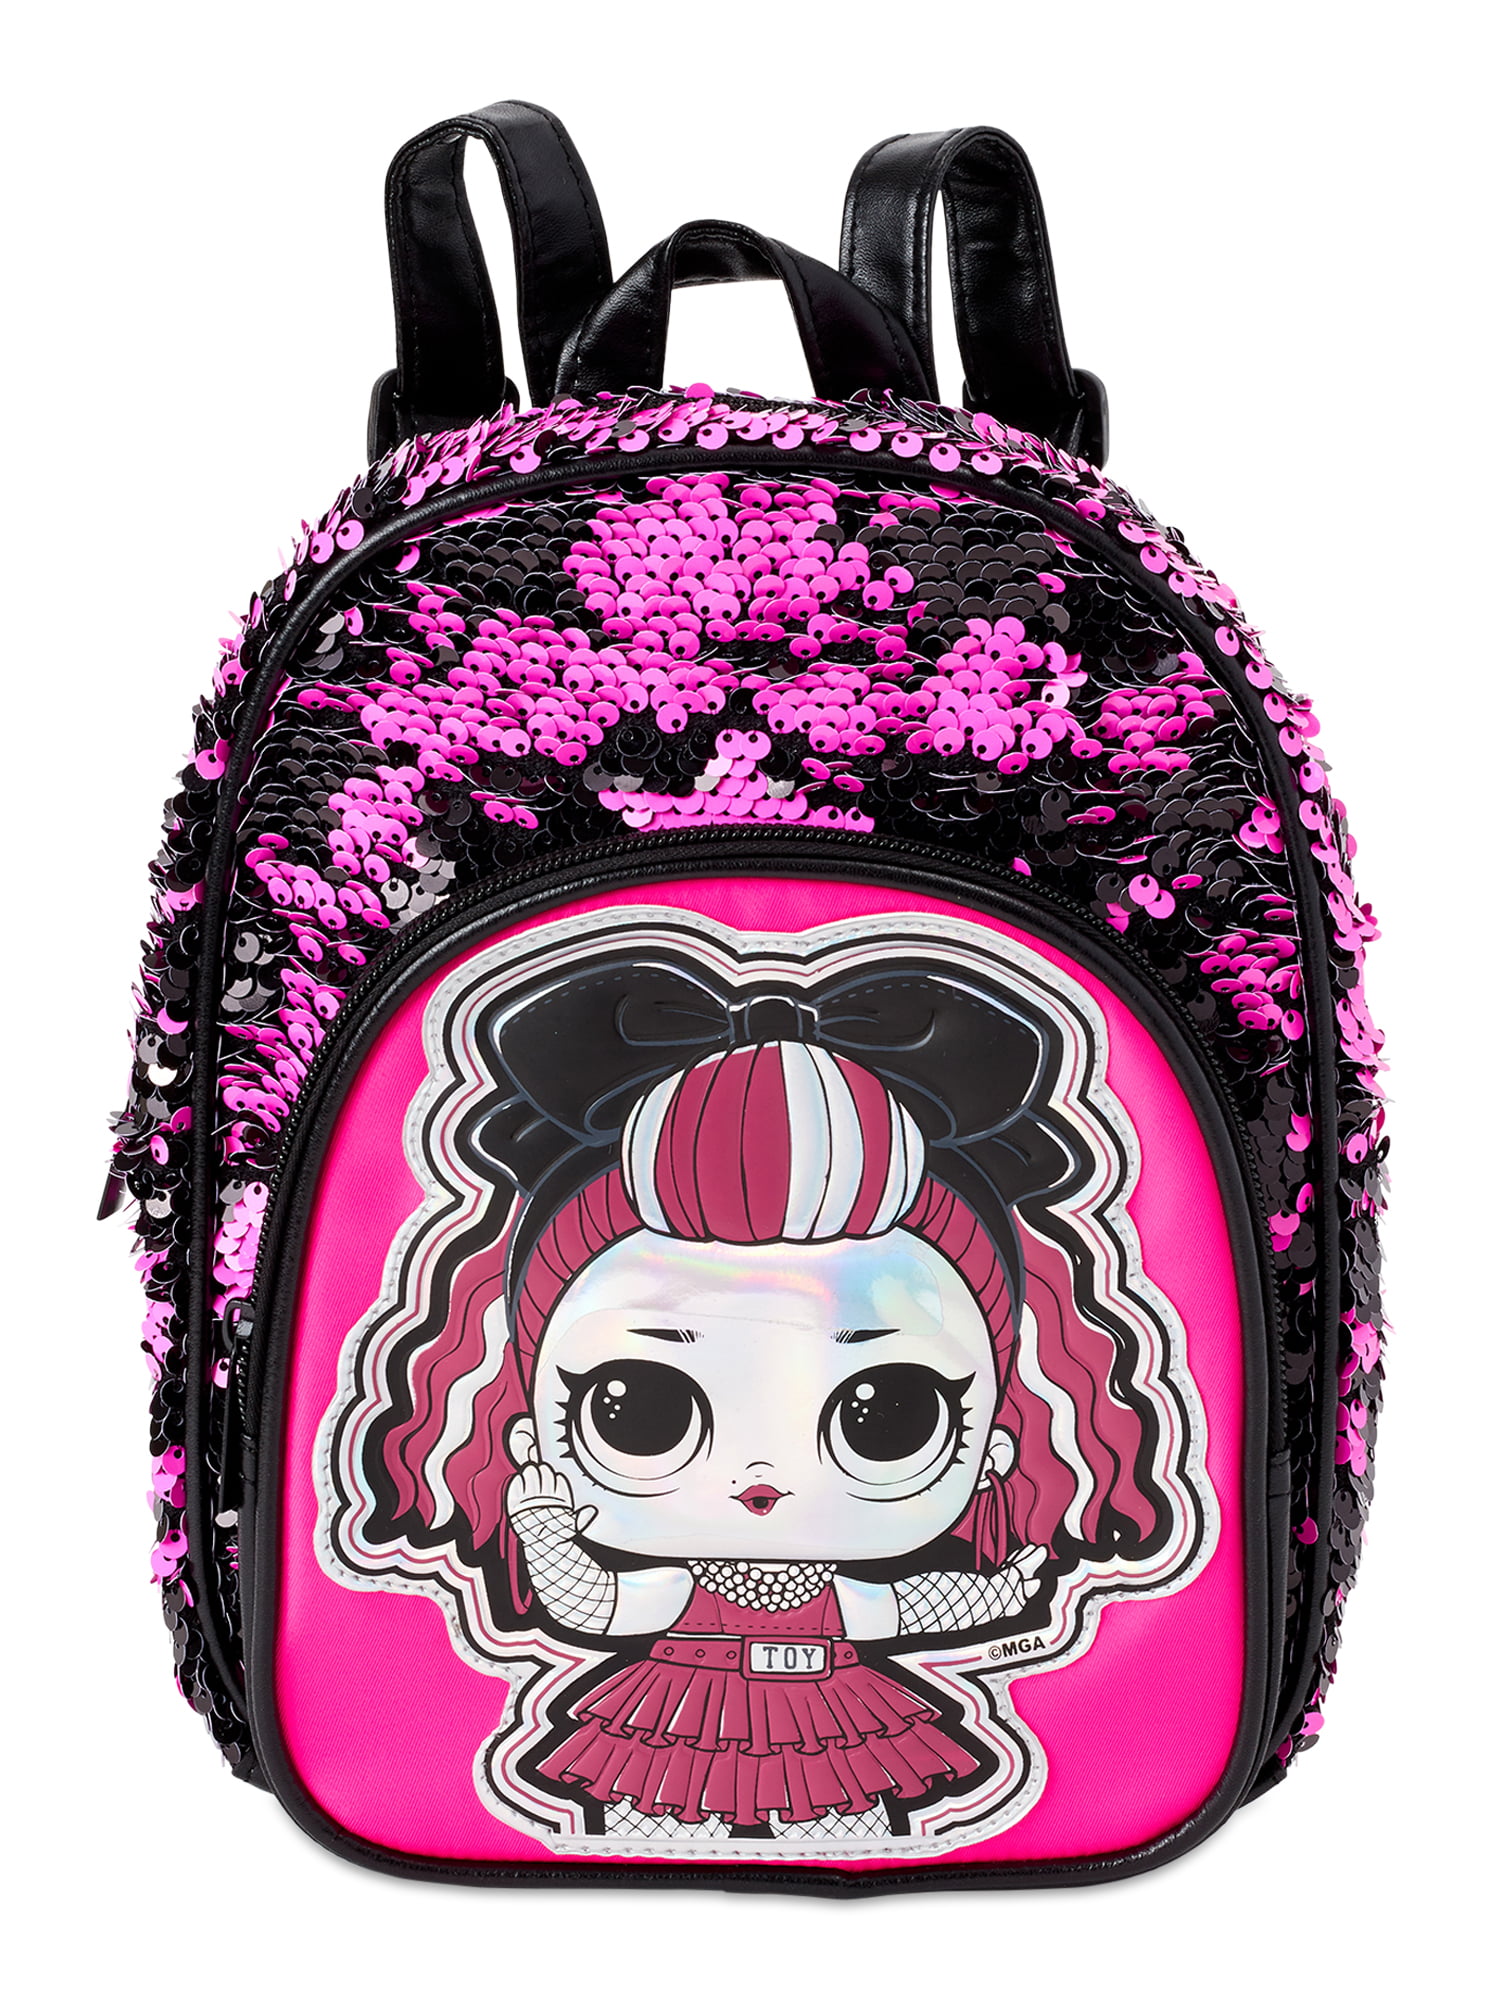  LOL Surprise Backpack Mini for Girls Kids Toddlers